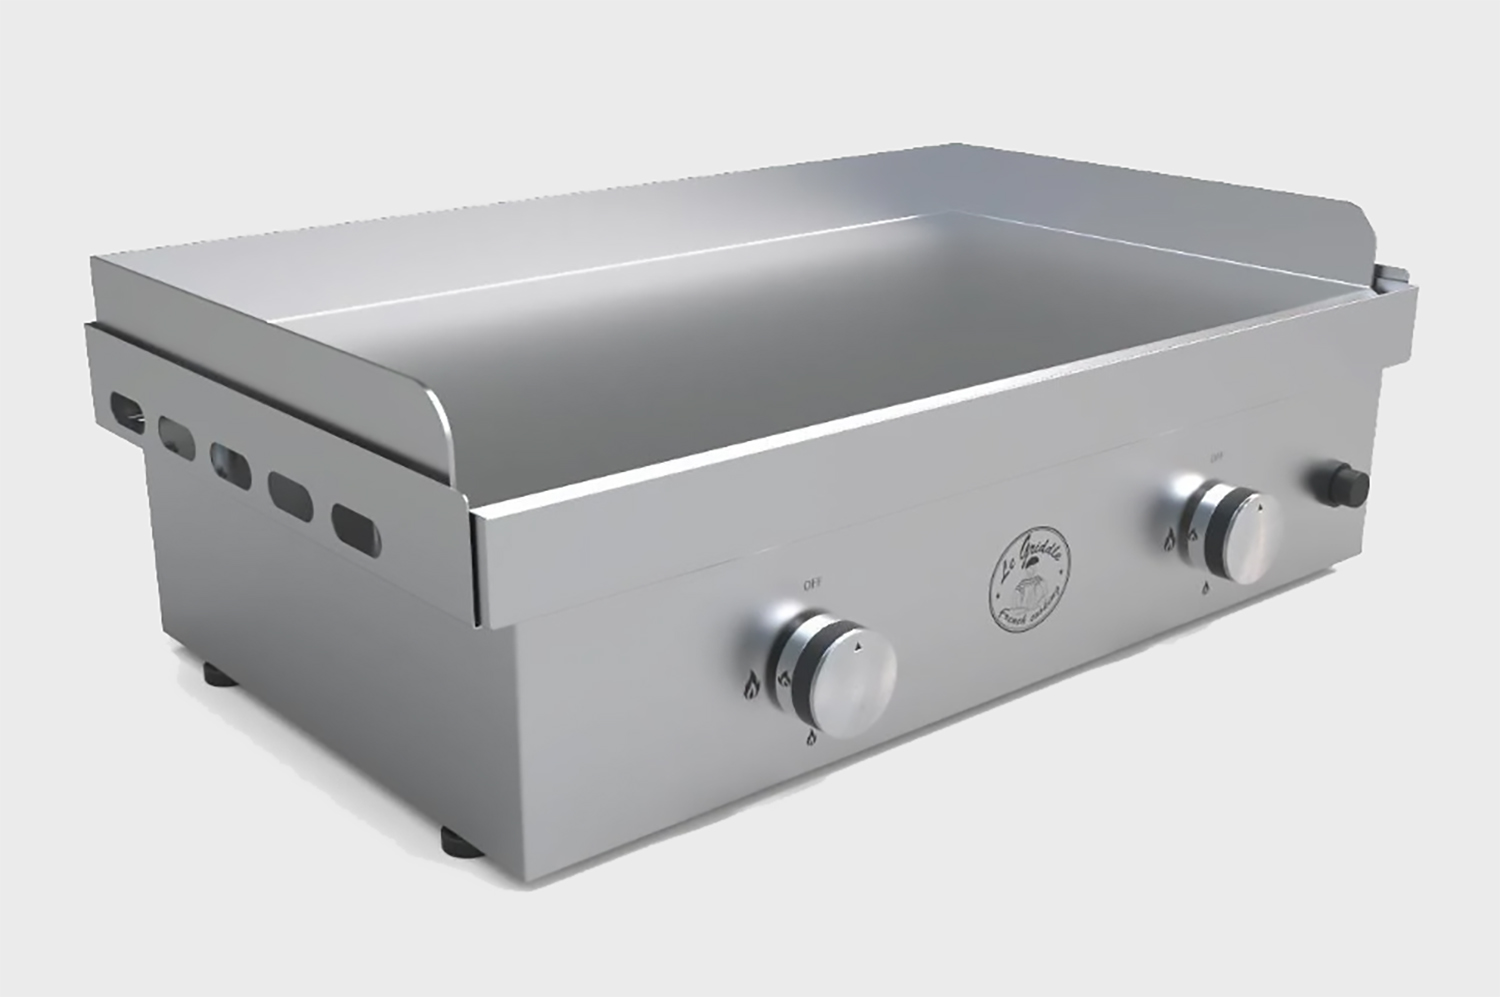 Le Griddle built in island flat top grill